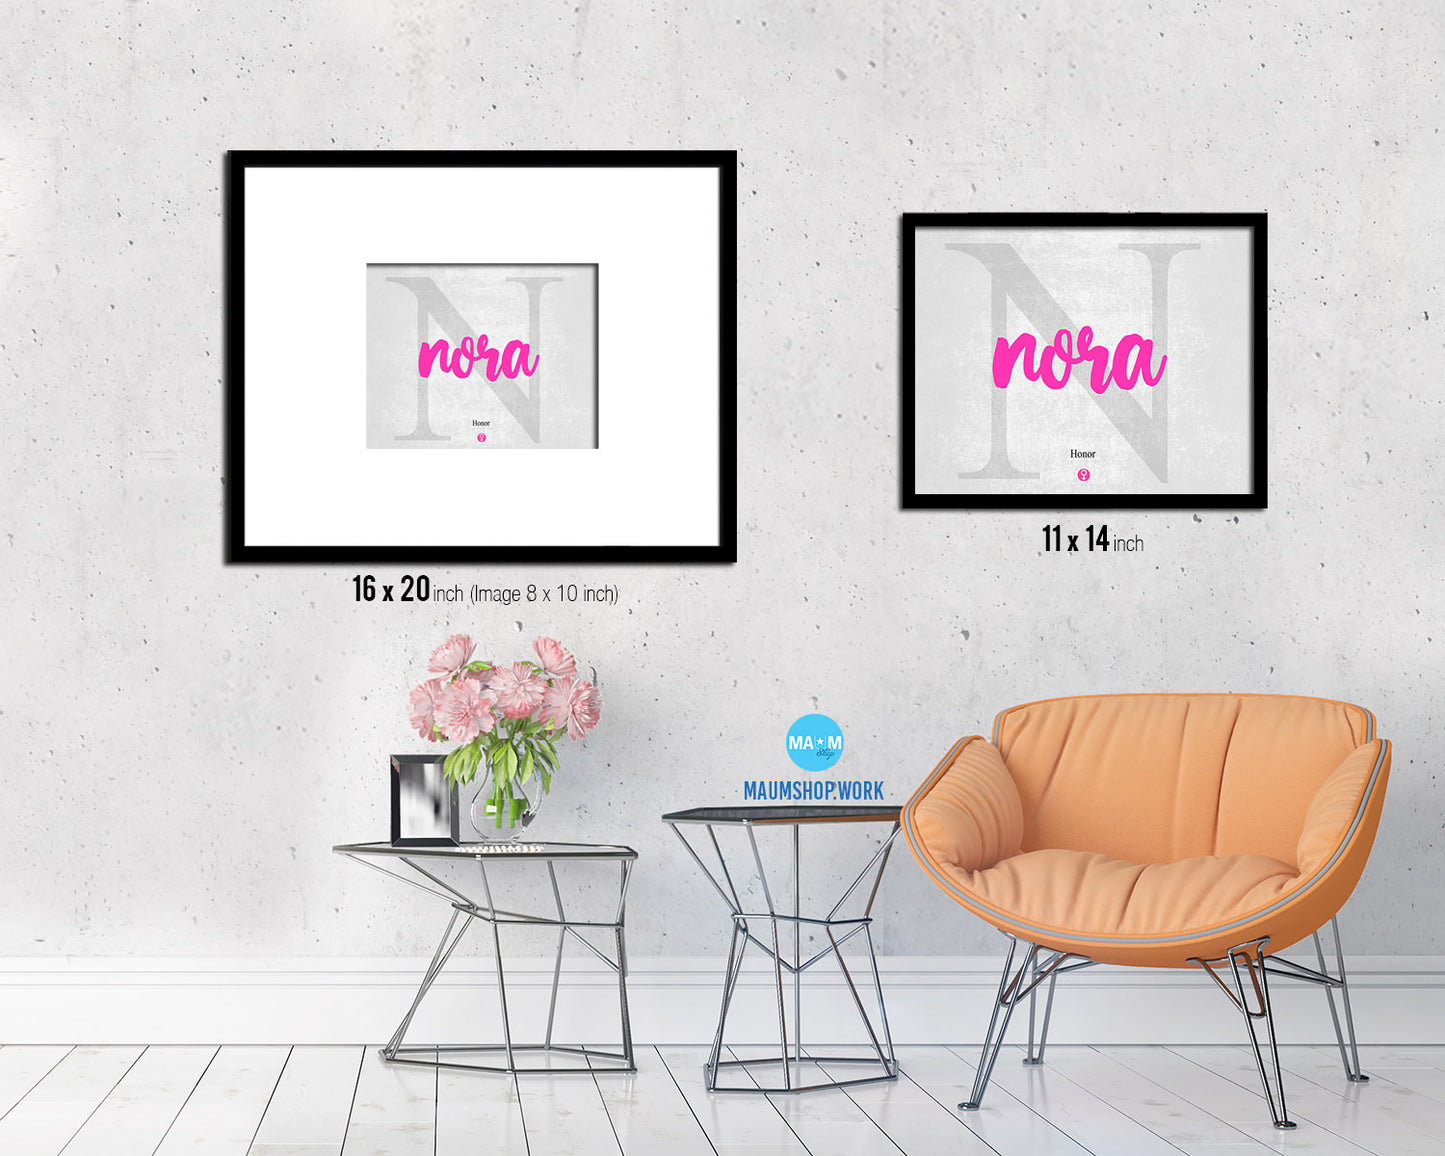 Nora Personalized Biblical Name Plate Art Framed Print Kids Baby Room Wall Decor Gifts